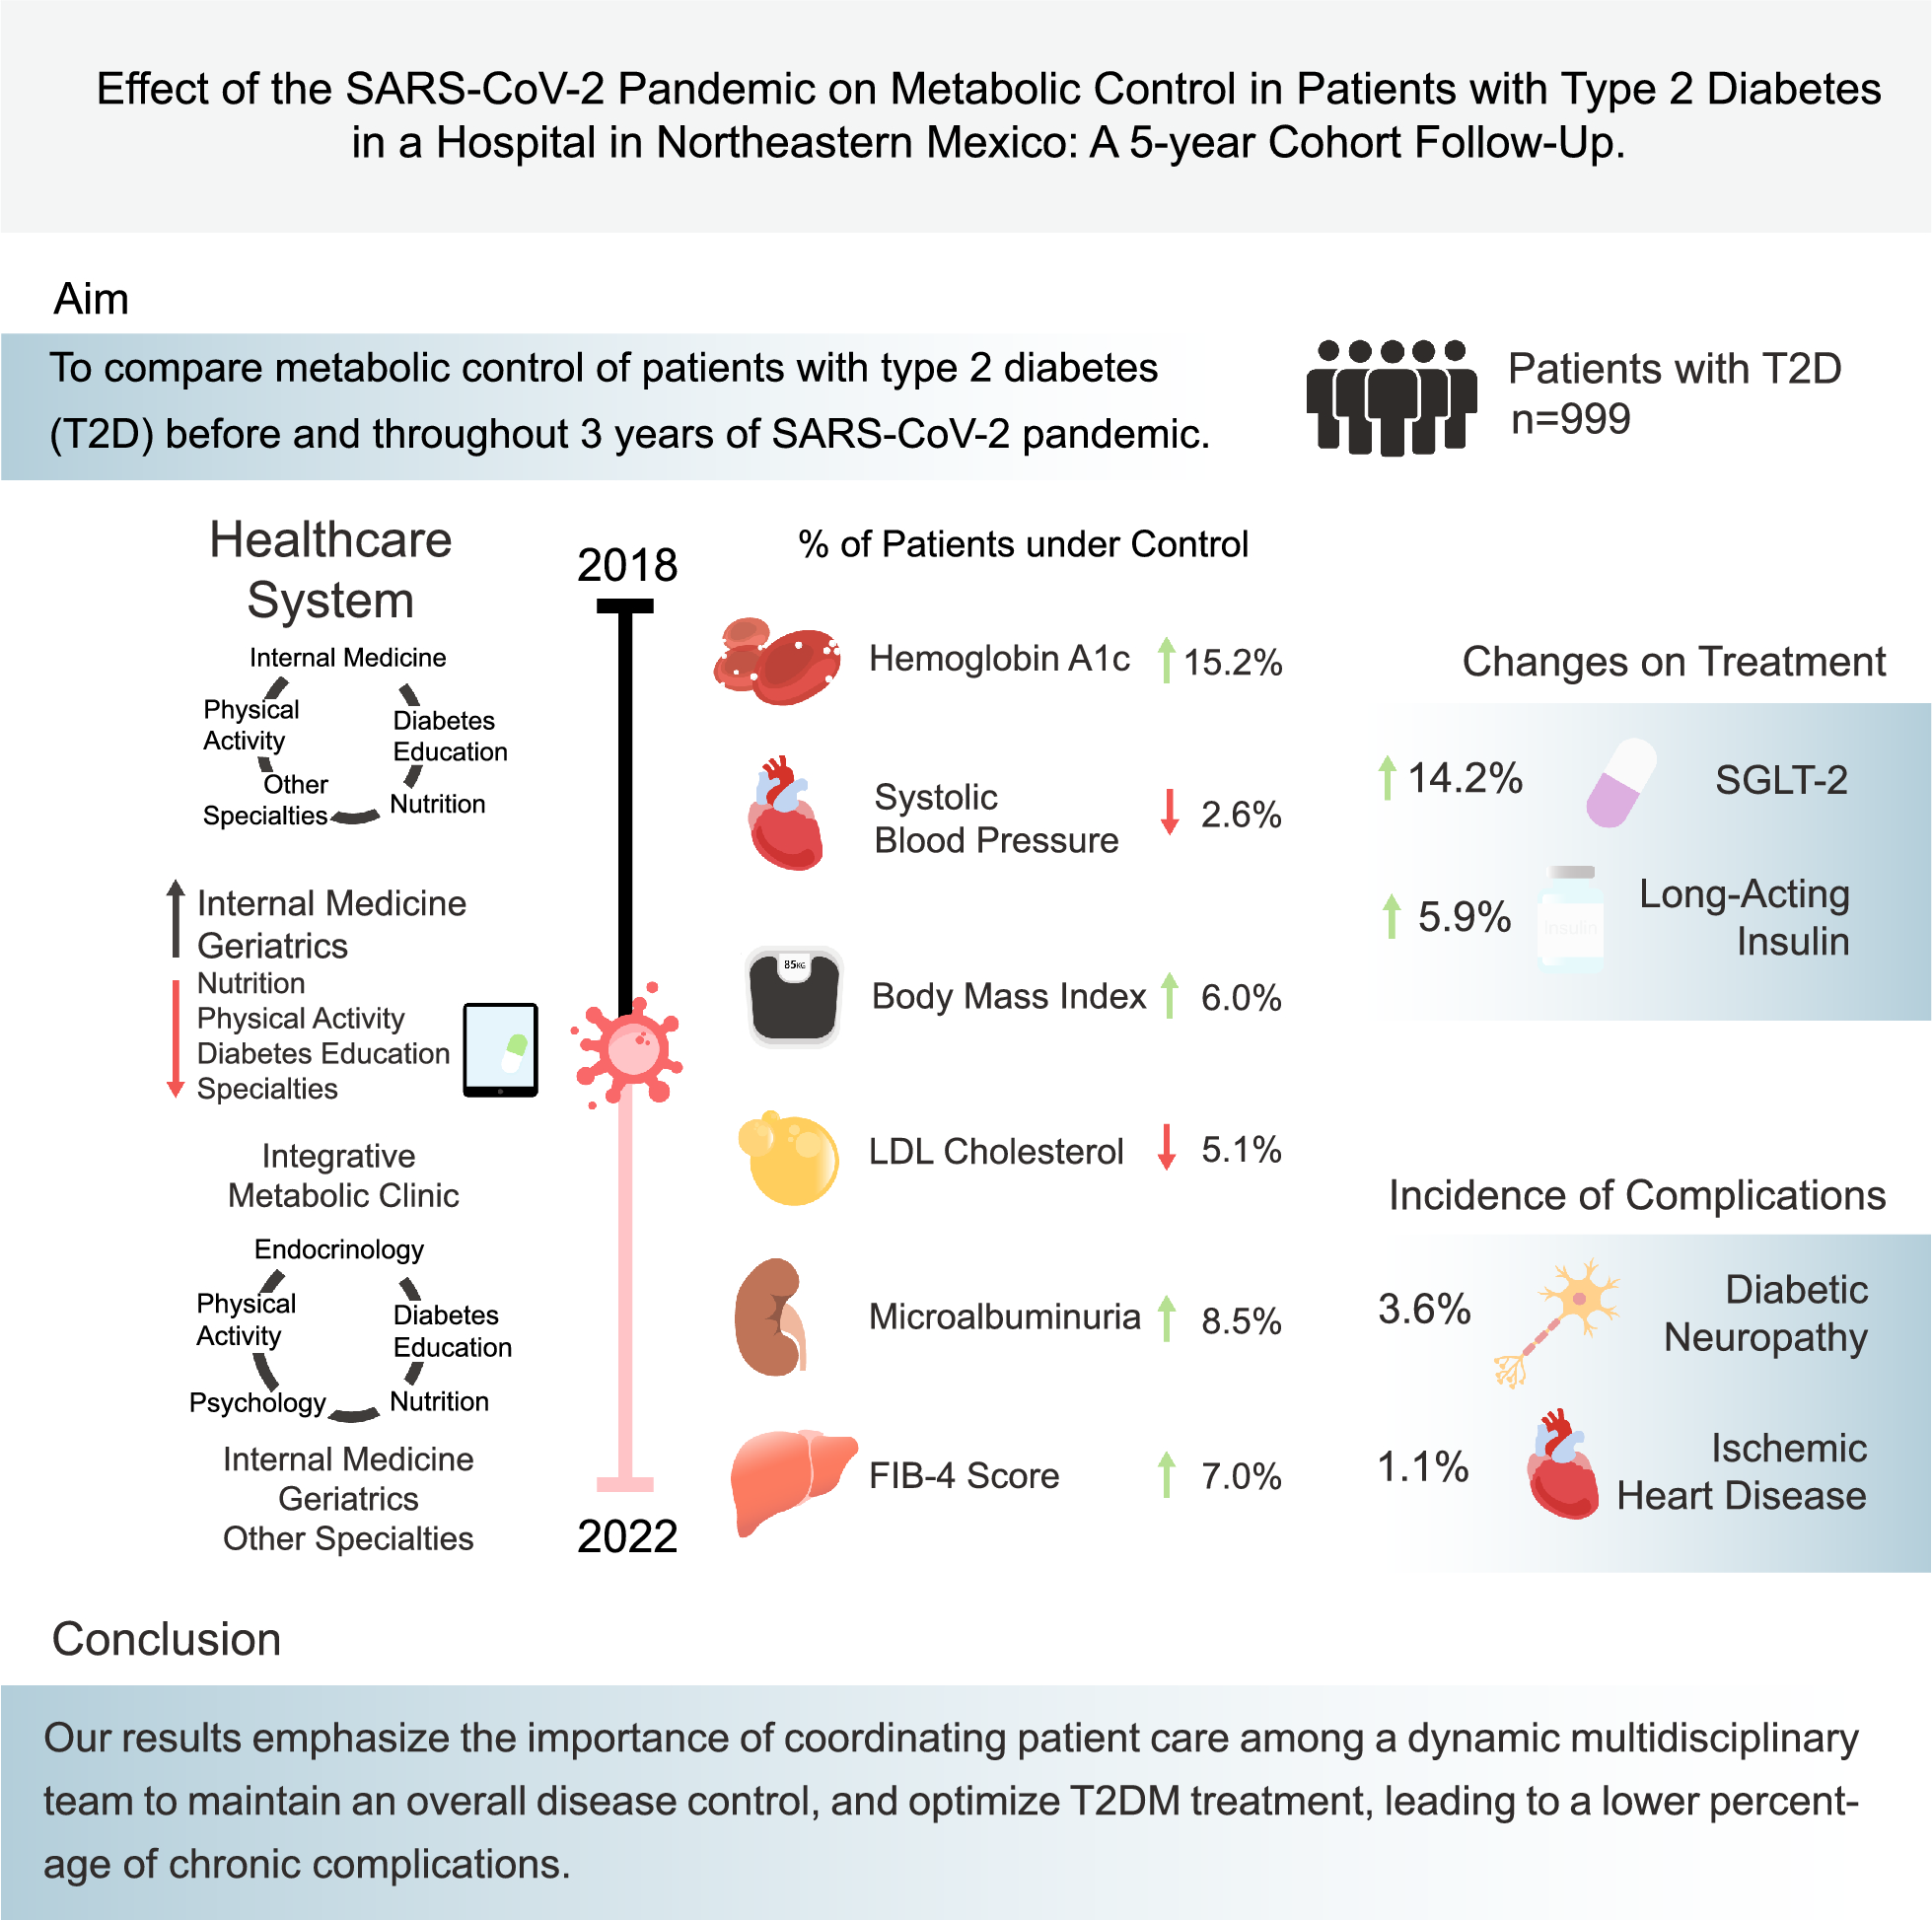 Effect of the SARS-CoV-2 pandemic on metabolic control in patients with type 2 diabetes: a 5-year cohort follow-up managed by a dynamic multidisciplinary team in Northeastern Mexico